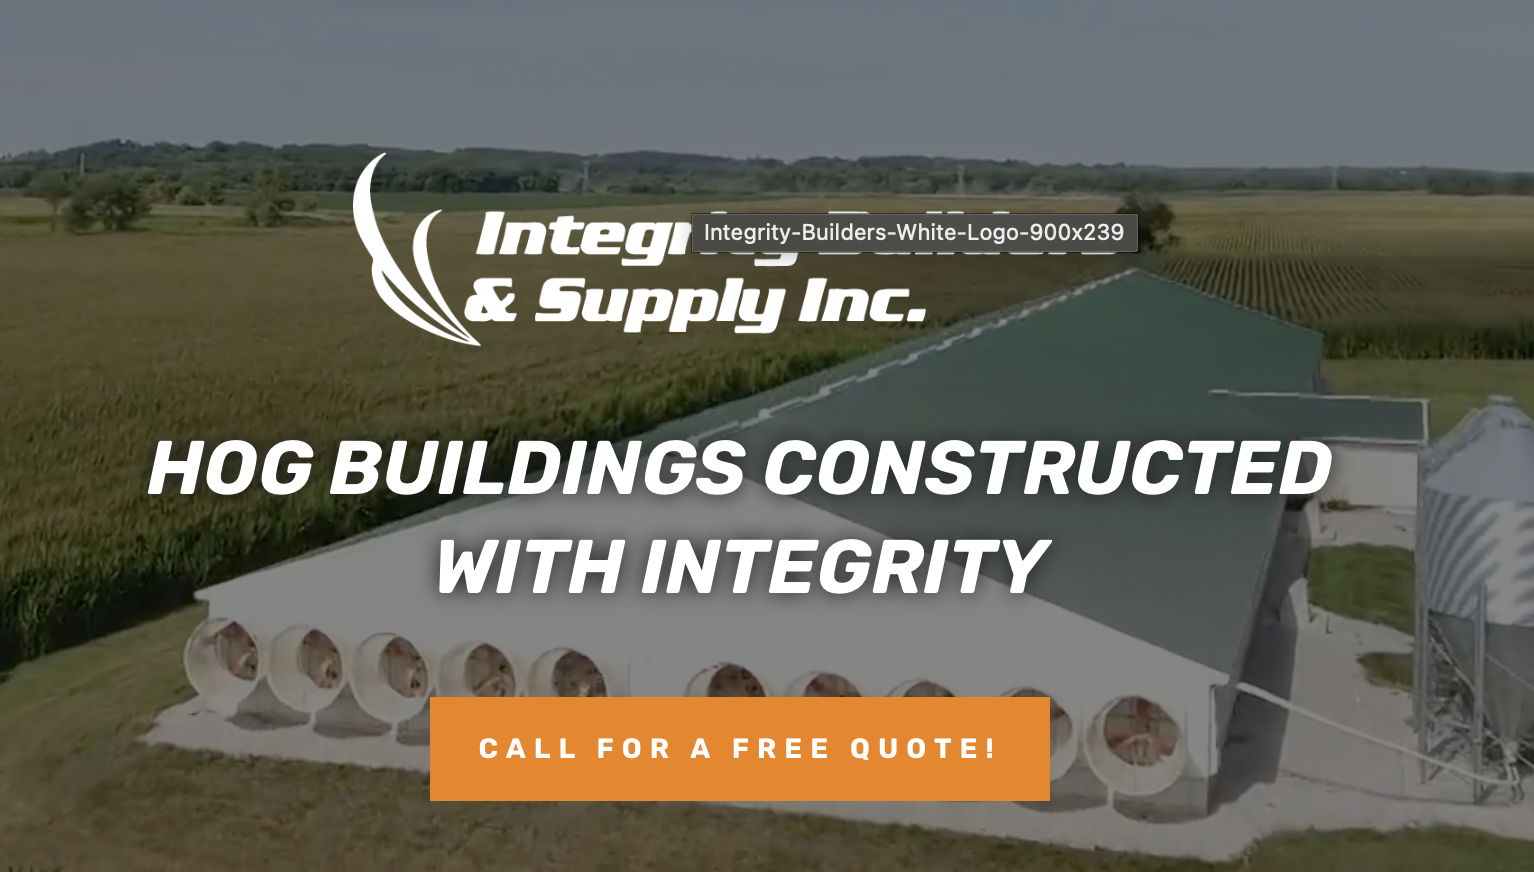 Integrity Builders &amp; Supply Inc